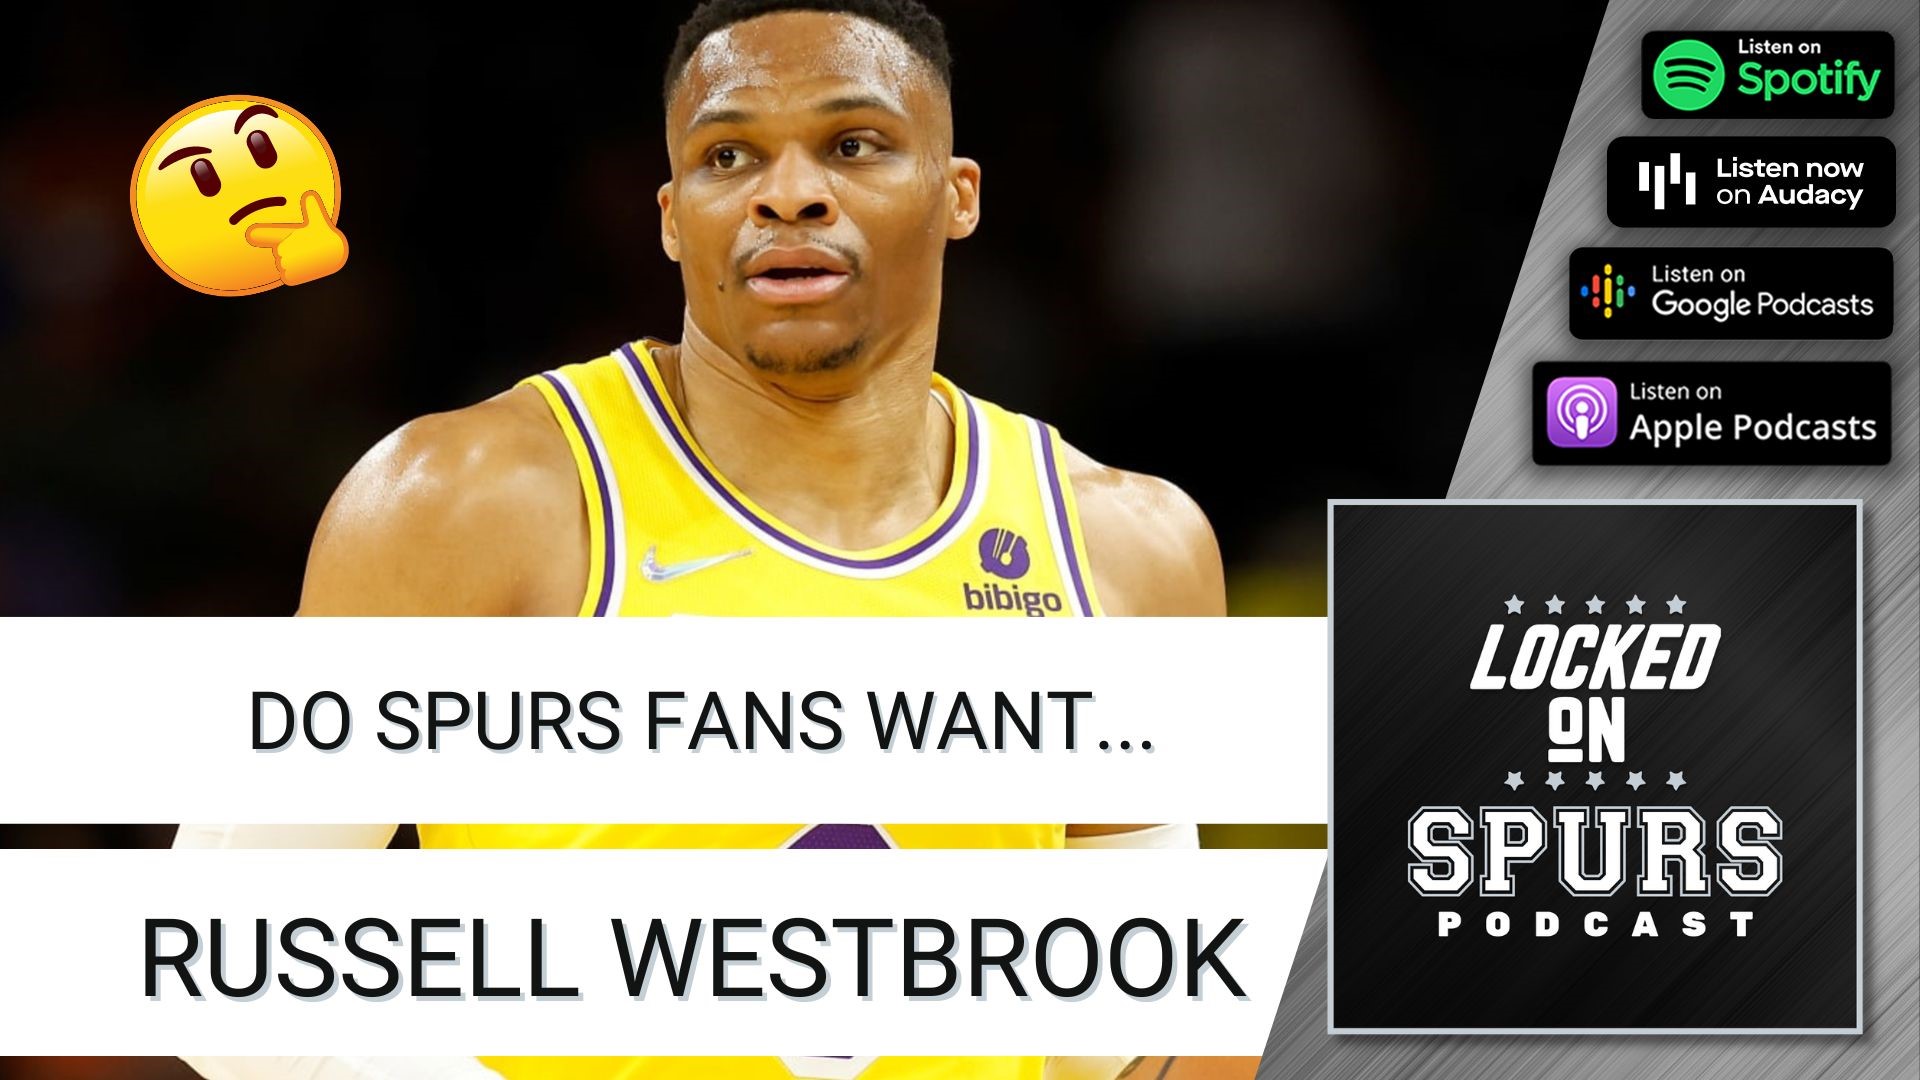 The Spurs could help the Lakers facilitate a trade of Russell Westbrook. How do fans feel about it?